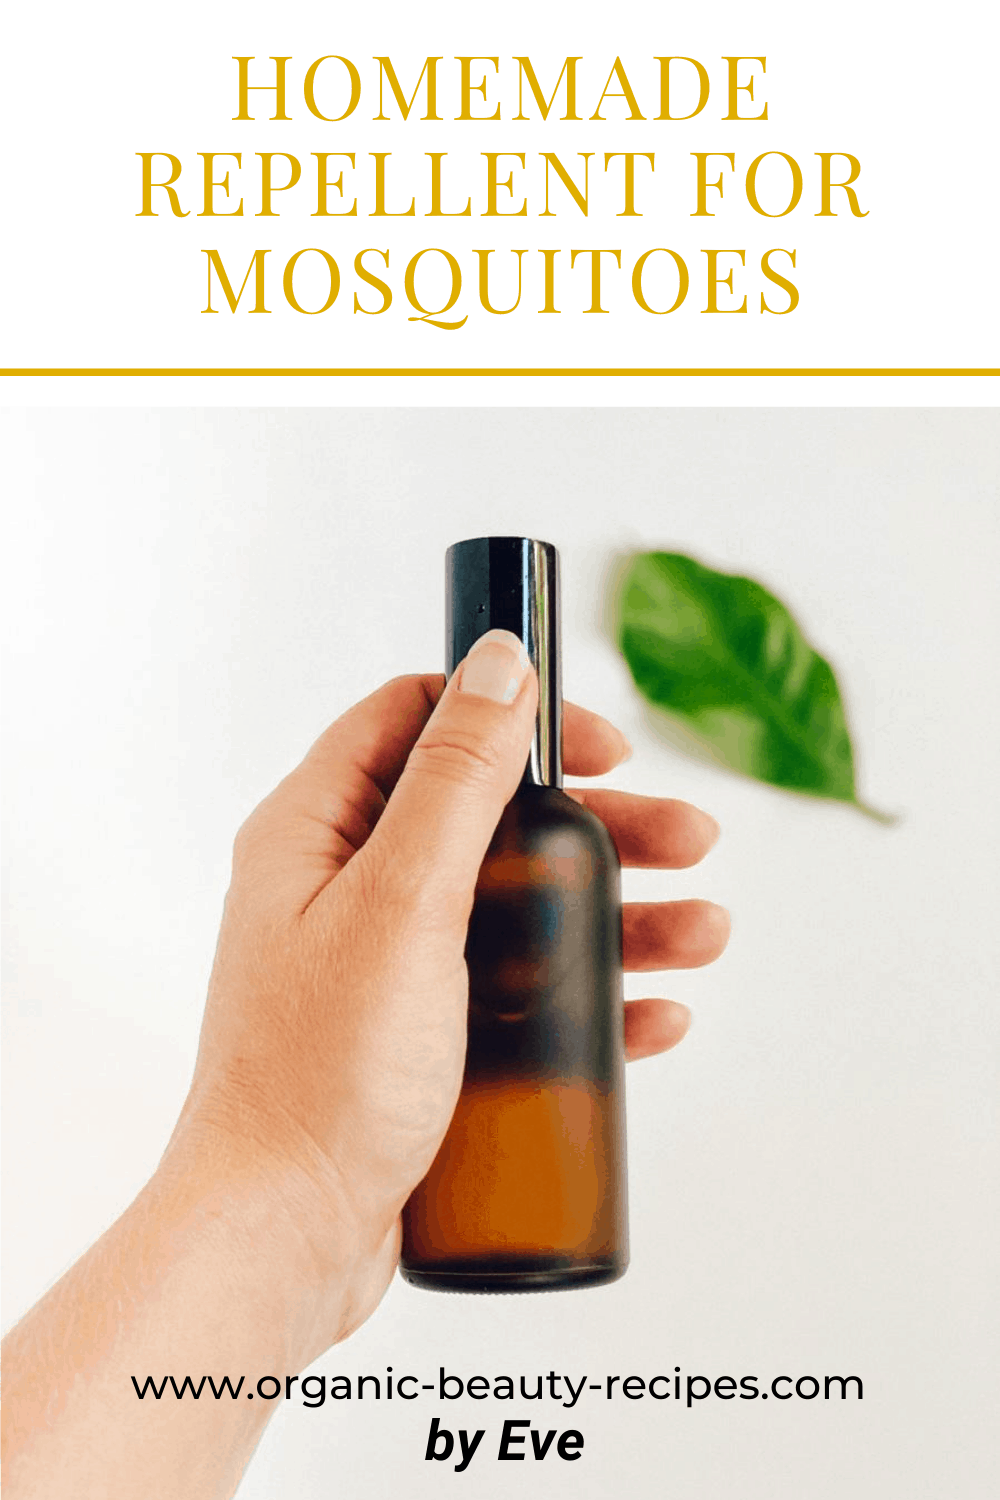 Homemade Repellent For Mosquitoes